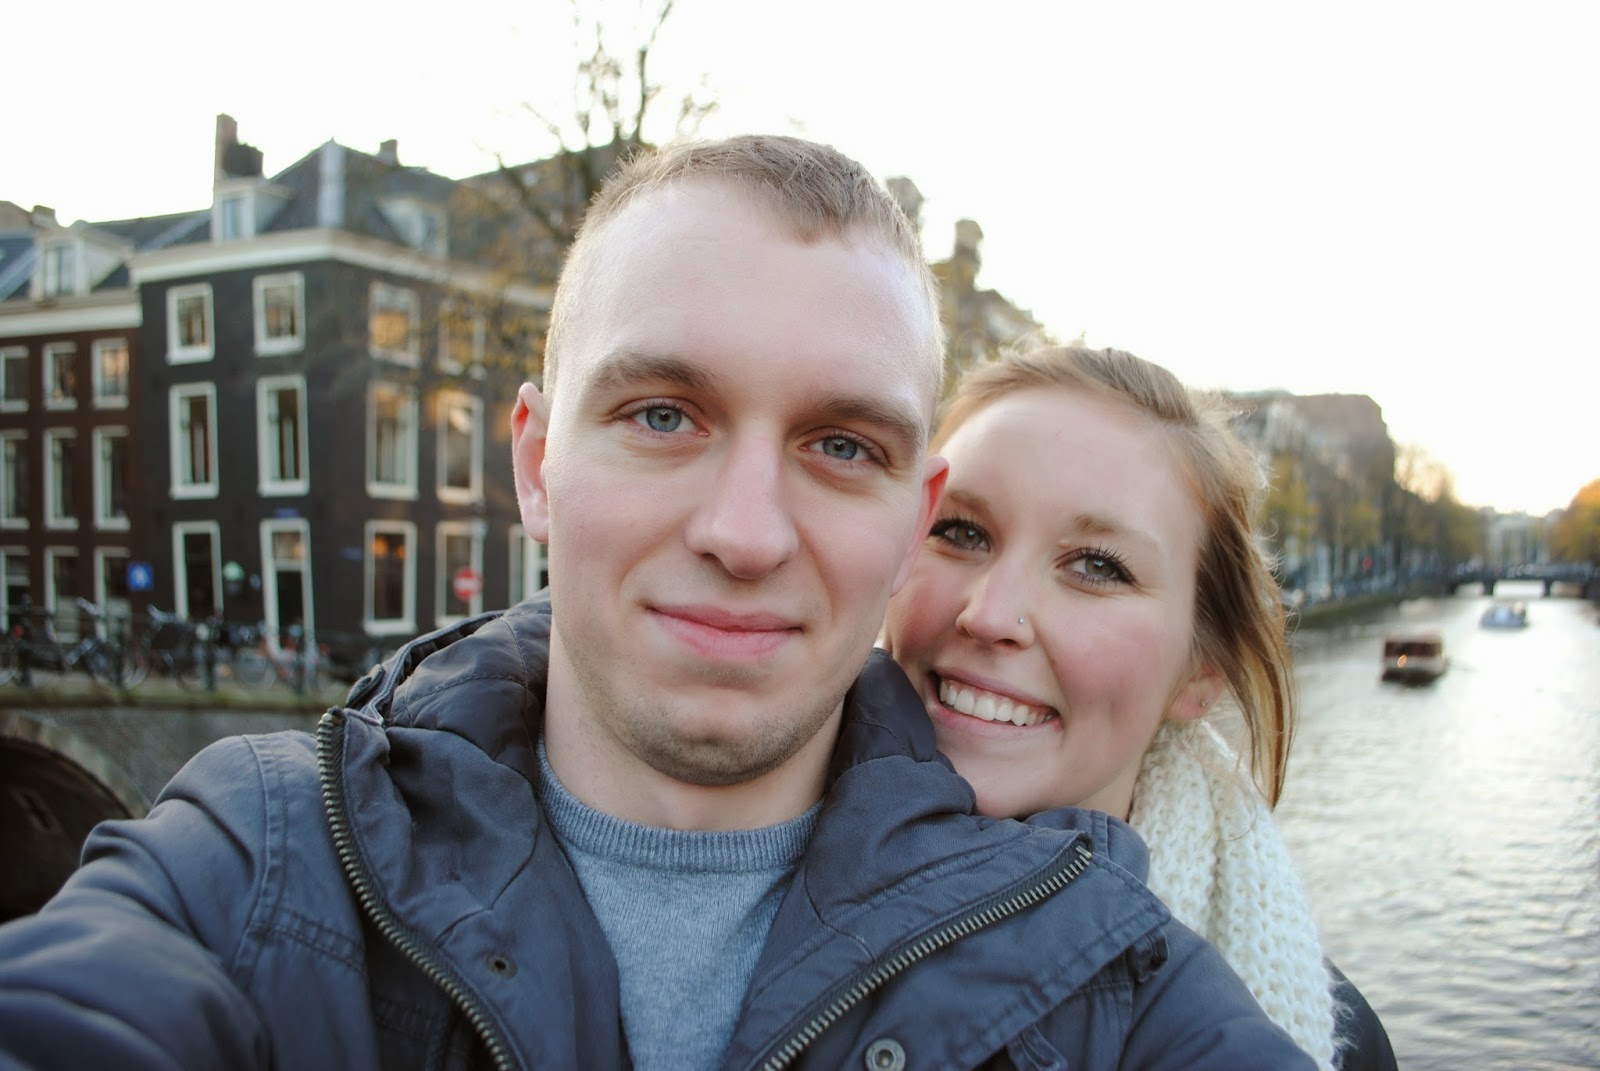 Ben and Erinn smiling in Amsterdam.